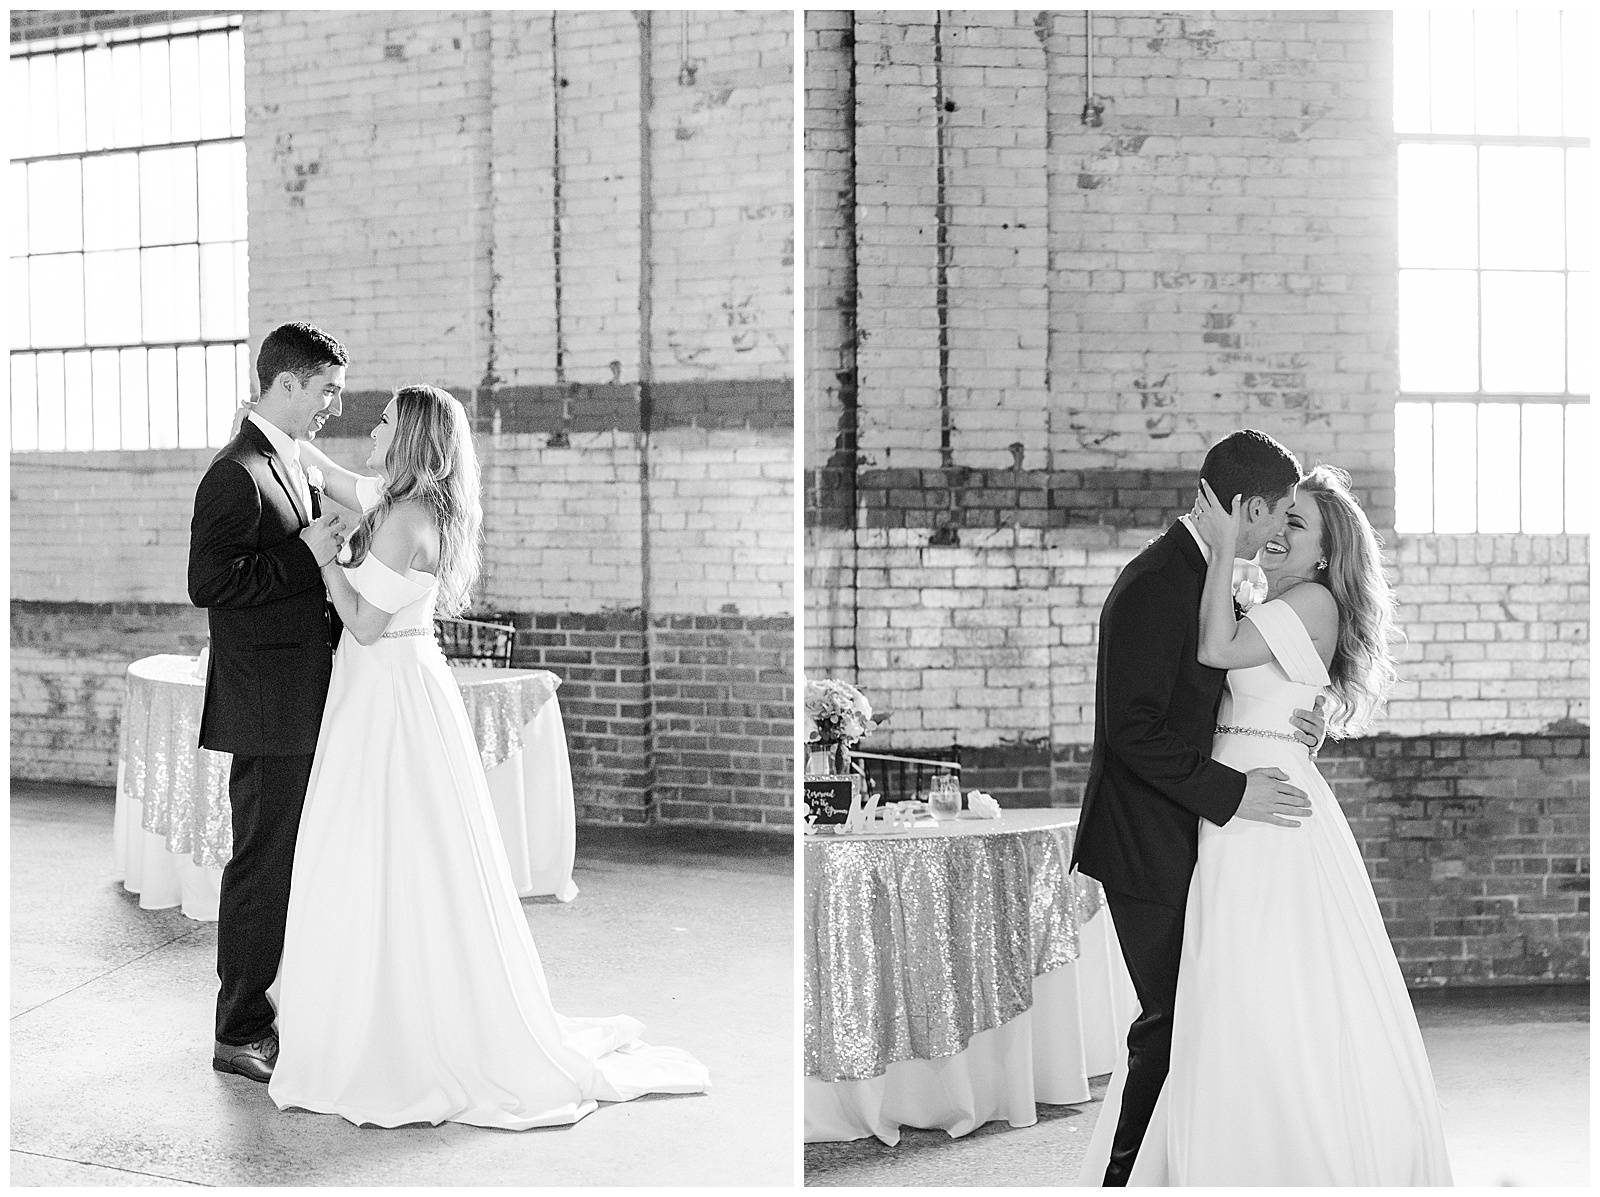 Stunning Modern bride and groom first dance in indoor brick venue from Summer Wedding in Charlotte, NC | Check out the full wedding at KevynDixonPhoto.com